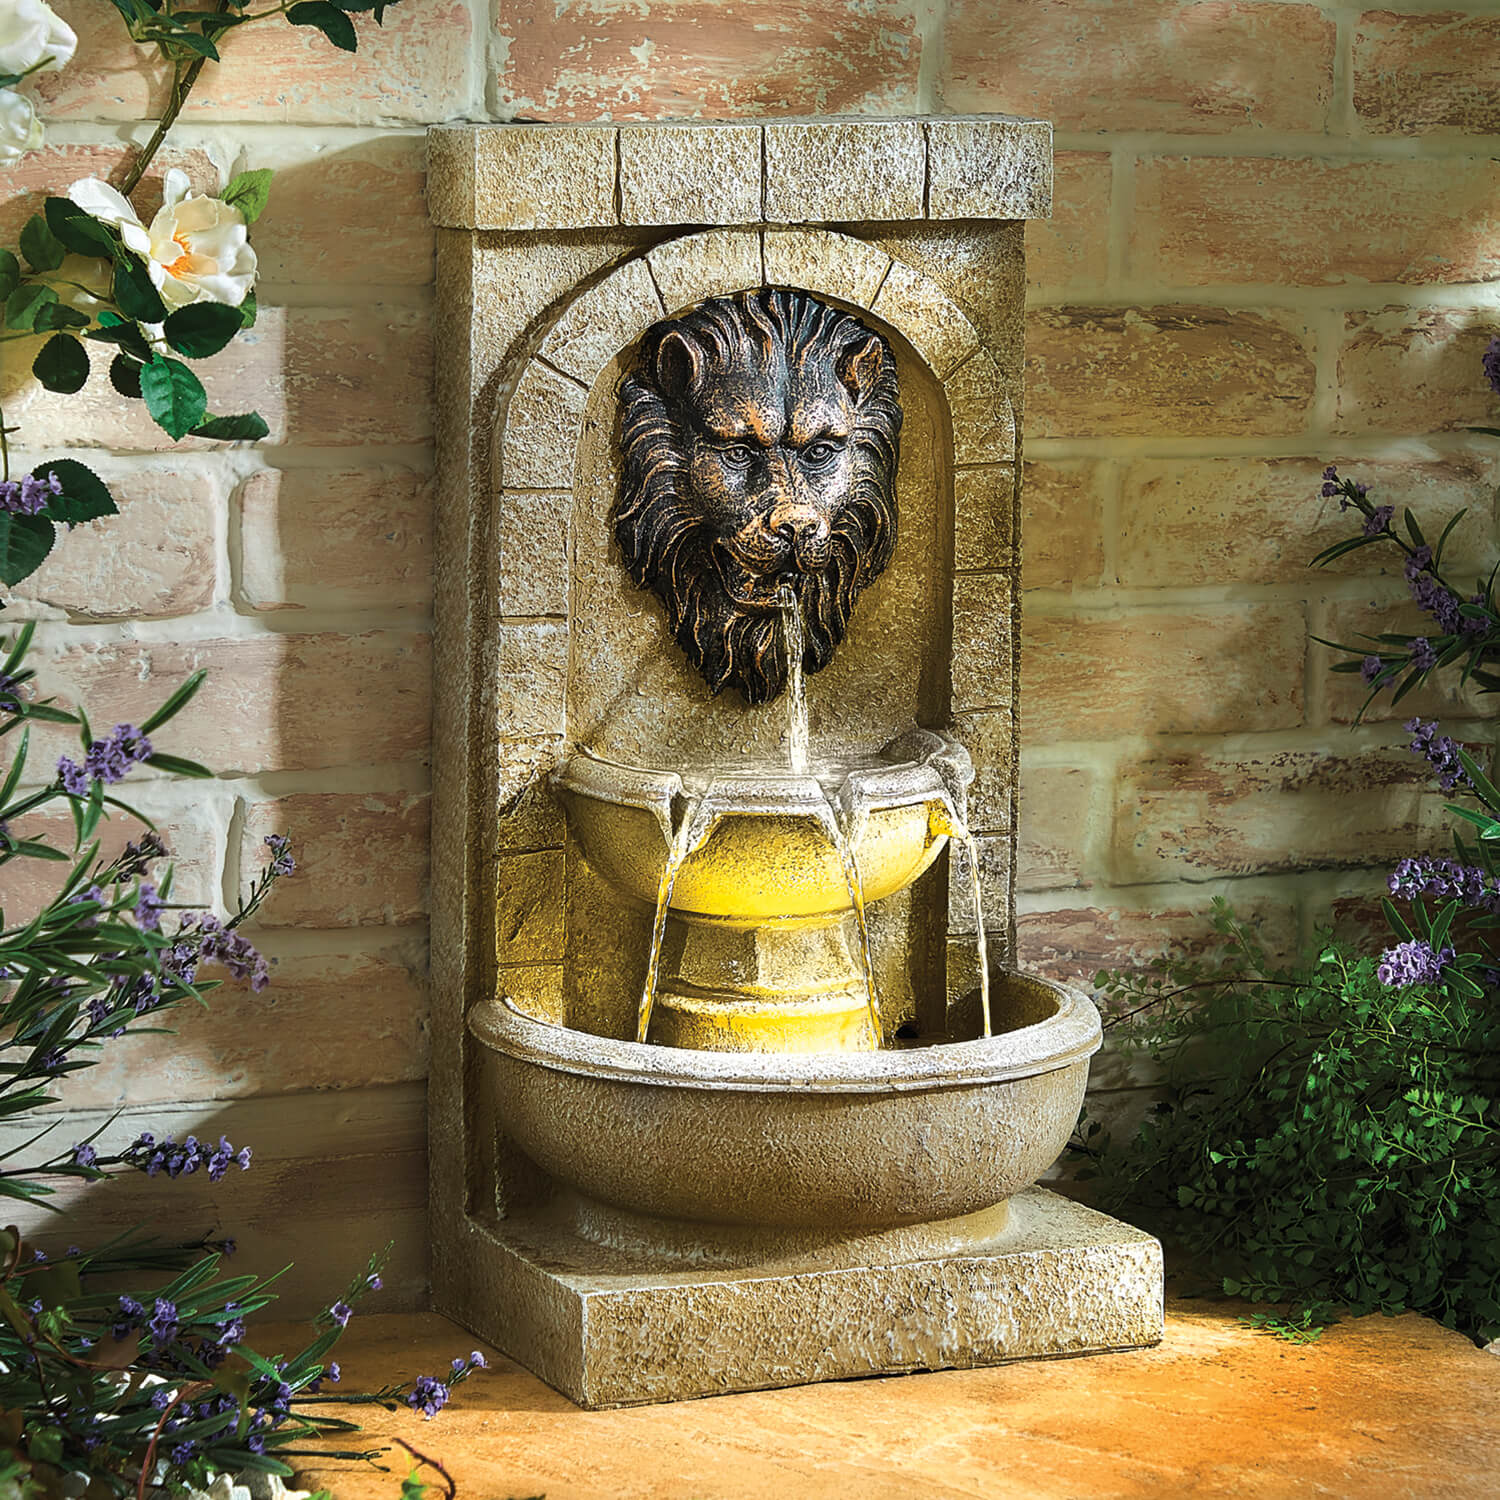 Solar Lion’s Head Water Feature